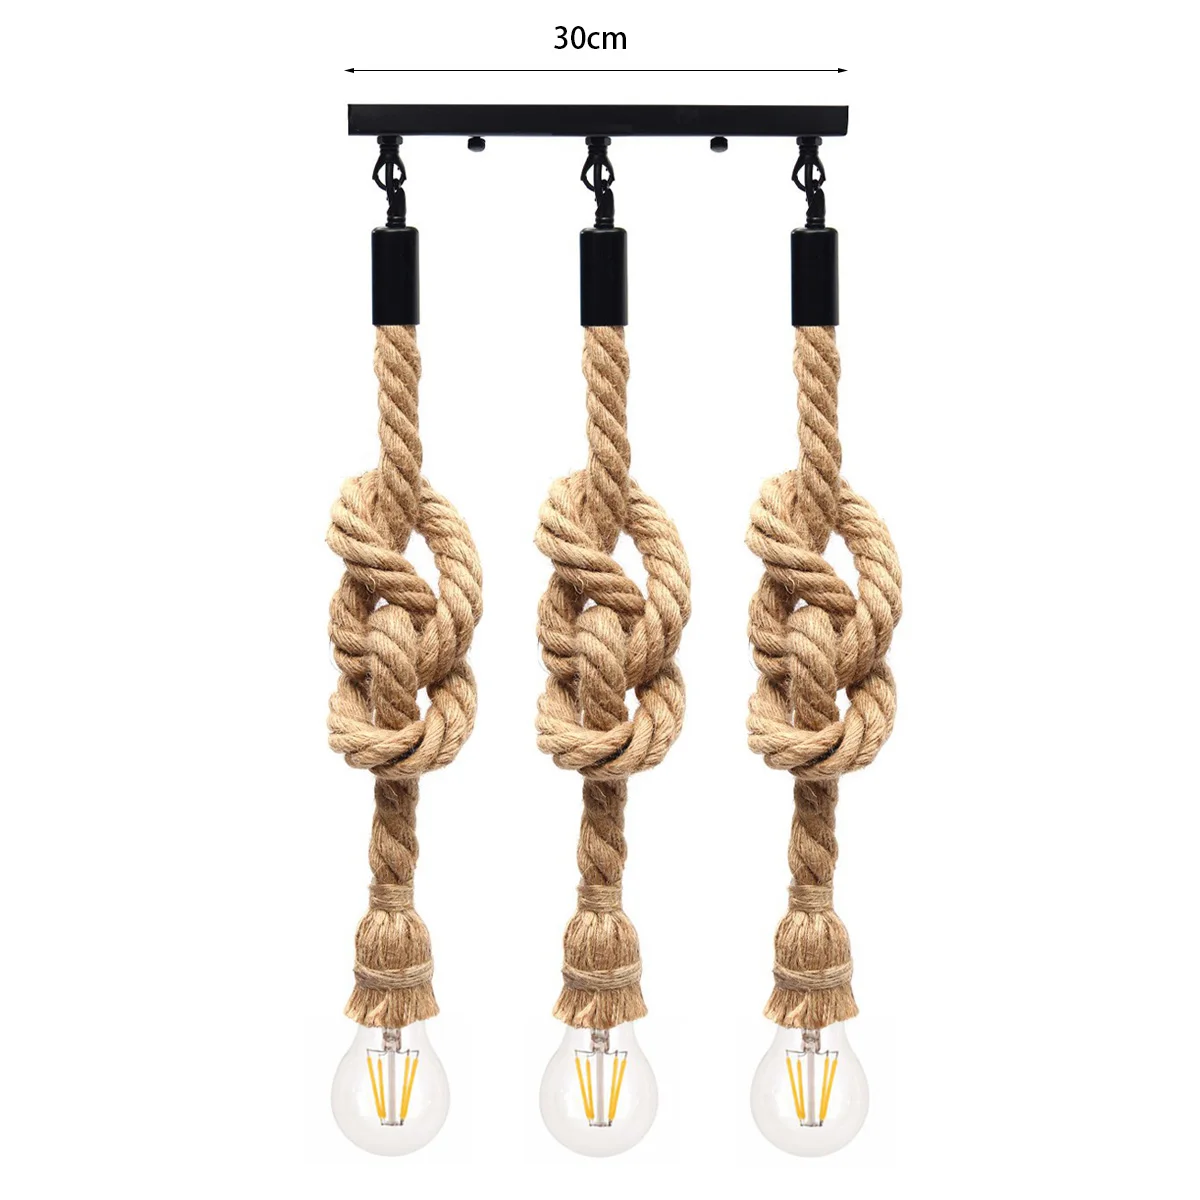 Vintage Industrial Style E27 Retro Three Head Hemp Rope Pendant Lamp Bulb Holder Hanging Light Fixture For Country Home Decor - Body Color: 3 heads